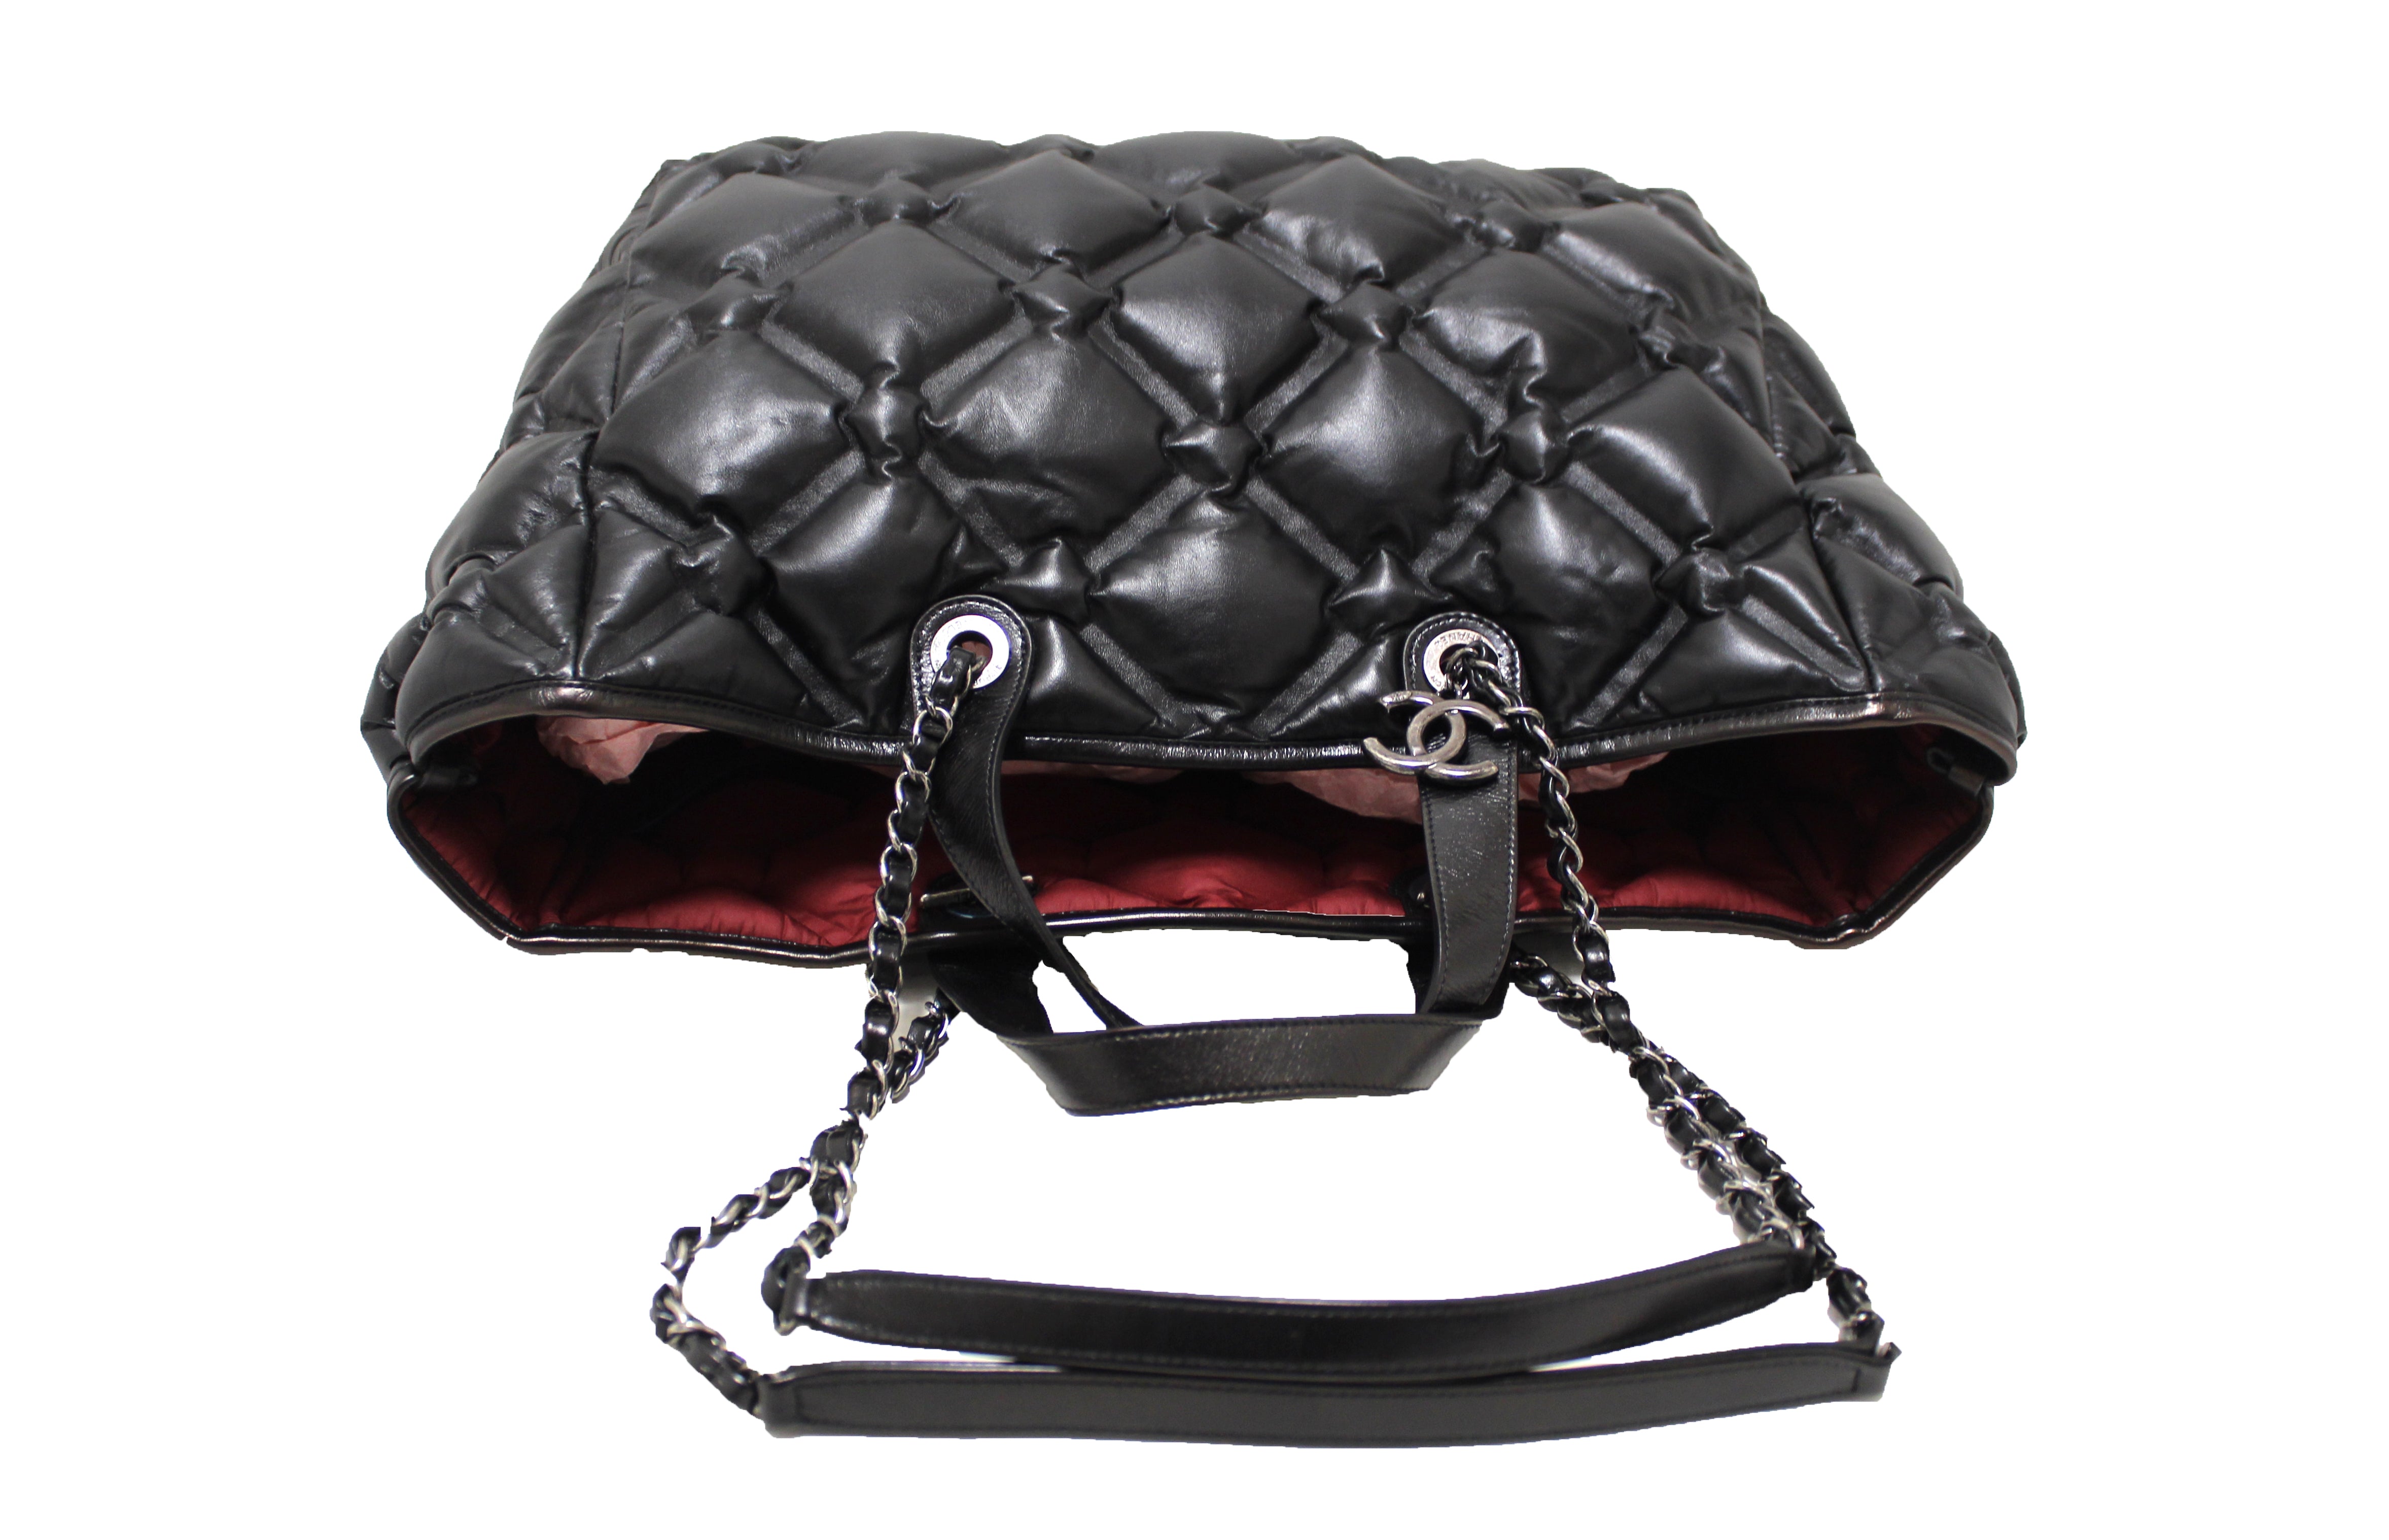 CHANEL Quilted CHANEL Classic Flap Handbags & Bags for Women